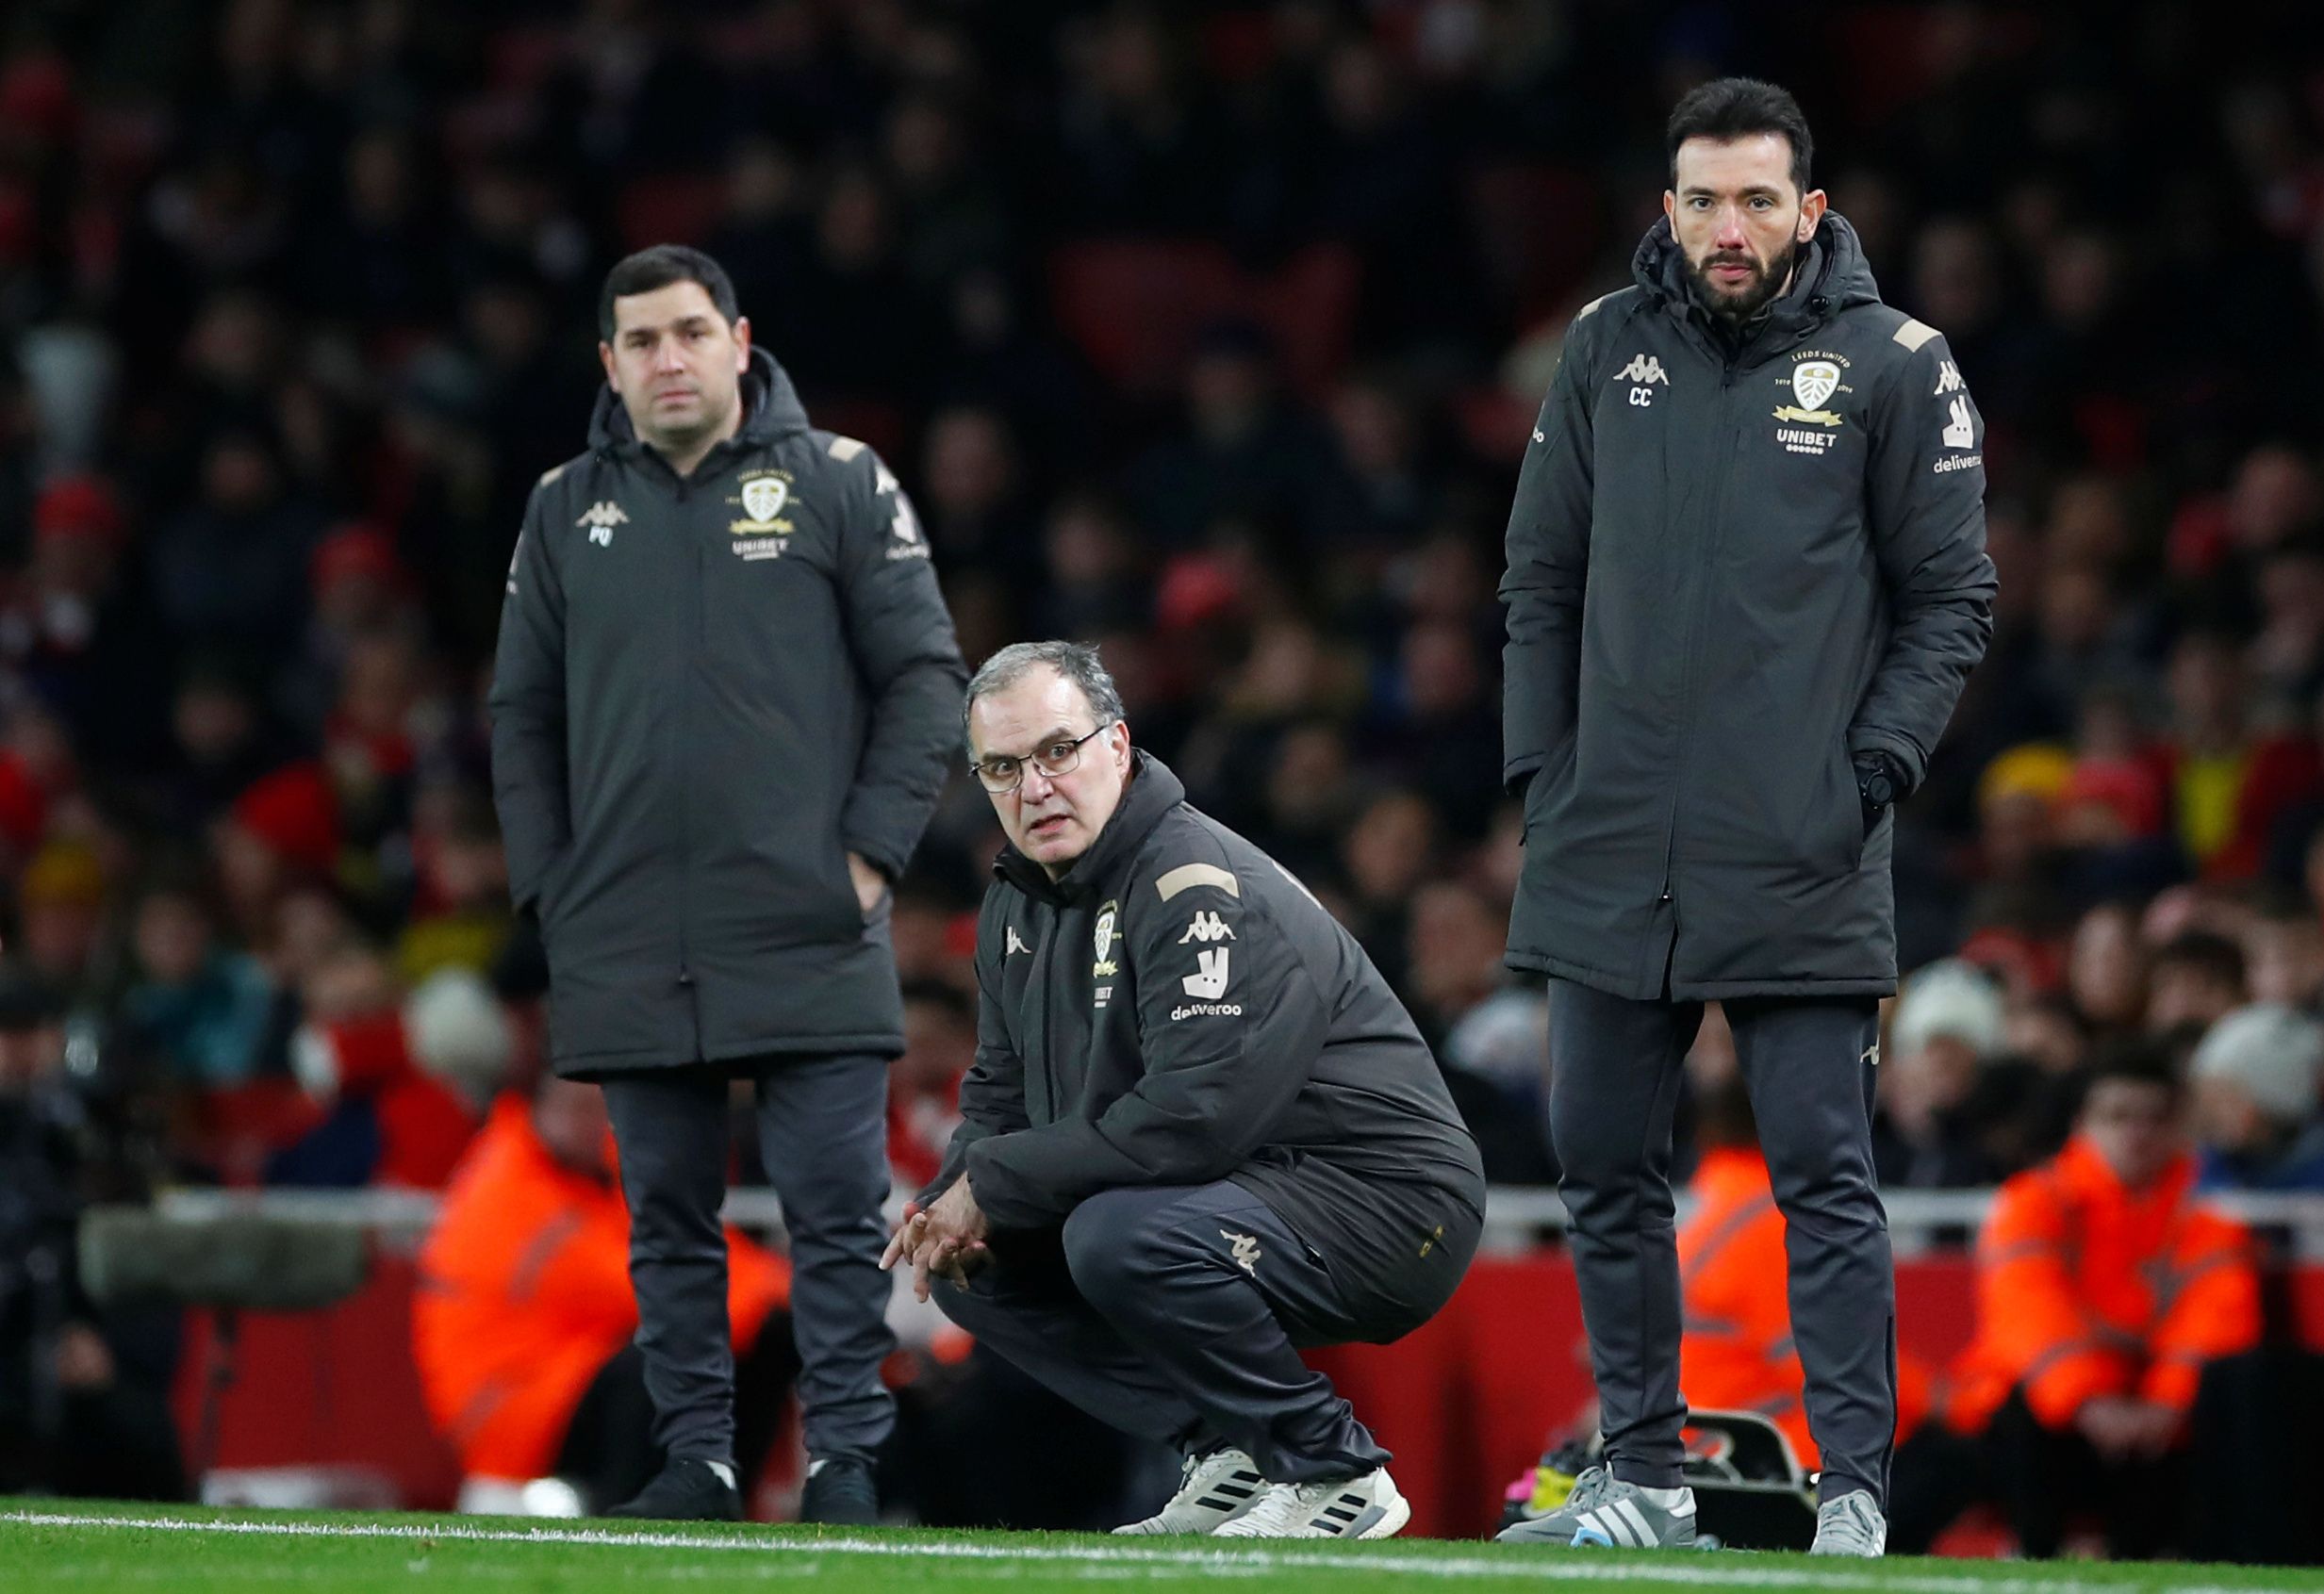 Soccer Football - FA Cup - Third Round - Arsenal v Leeds United - Emirates Stadium, London, Britain - January 6, 2020   Leeds United manager Marcelo Bielsa with first team coach Carlos Corberan and assistant coach Pablo Quiroga   REUTERS/Eddie Keogh